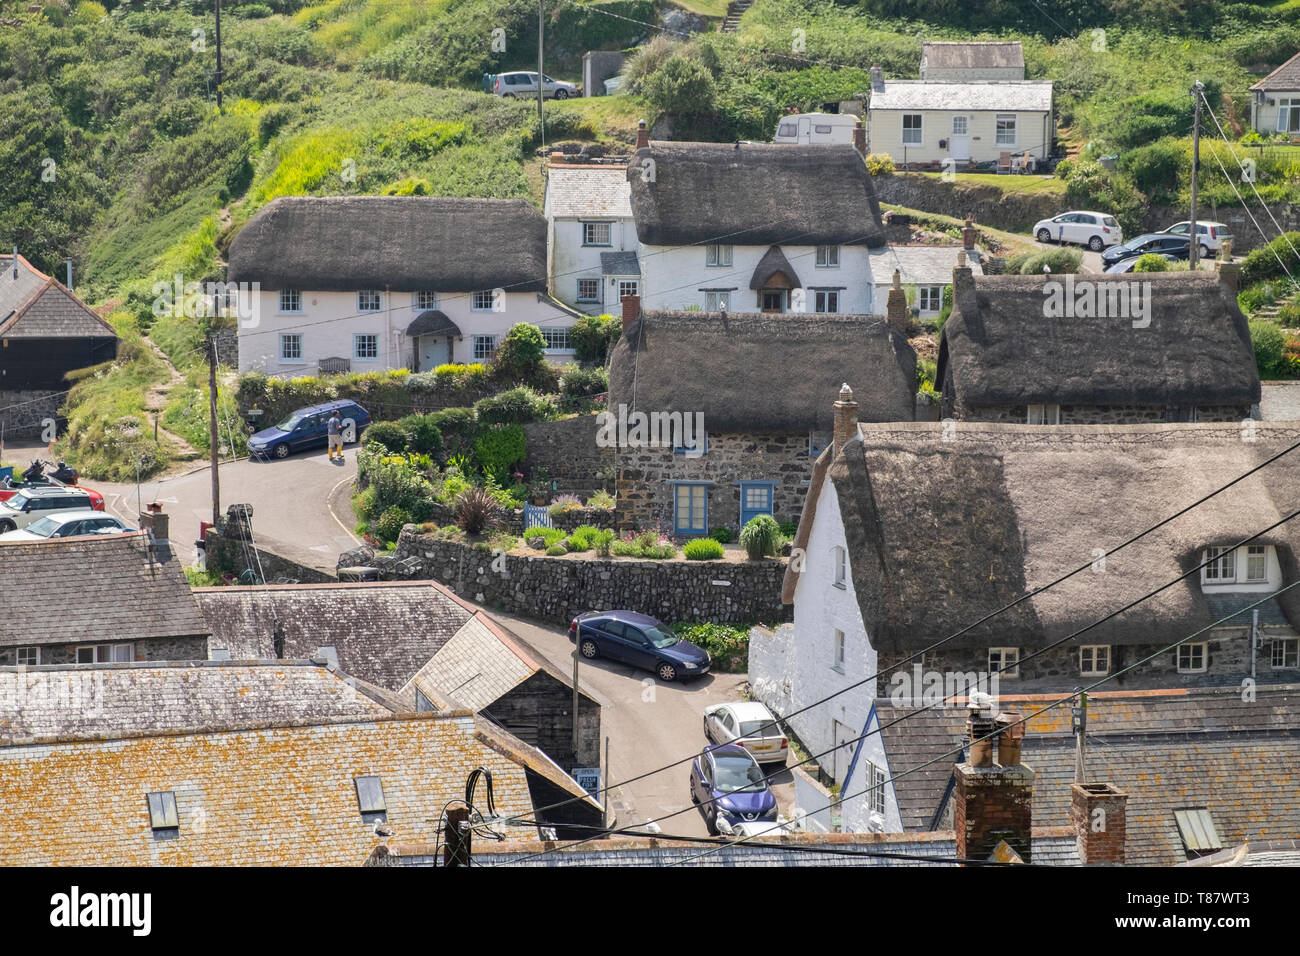 Thatched whitewashed cottages and narrow lane in the small quaint fishing village of Cadgwith, Cornwall, England Stock Photo